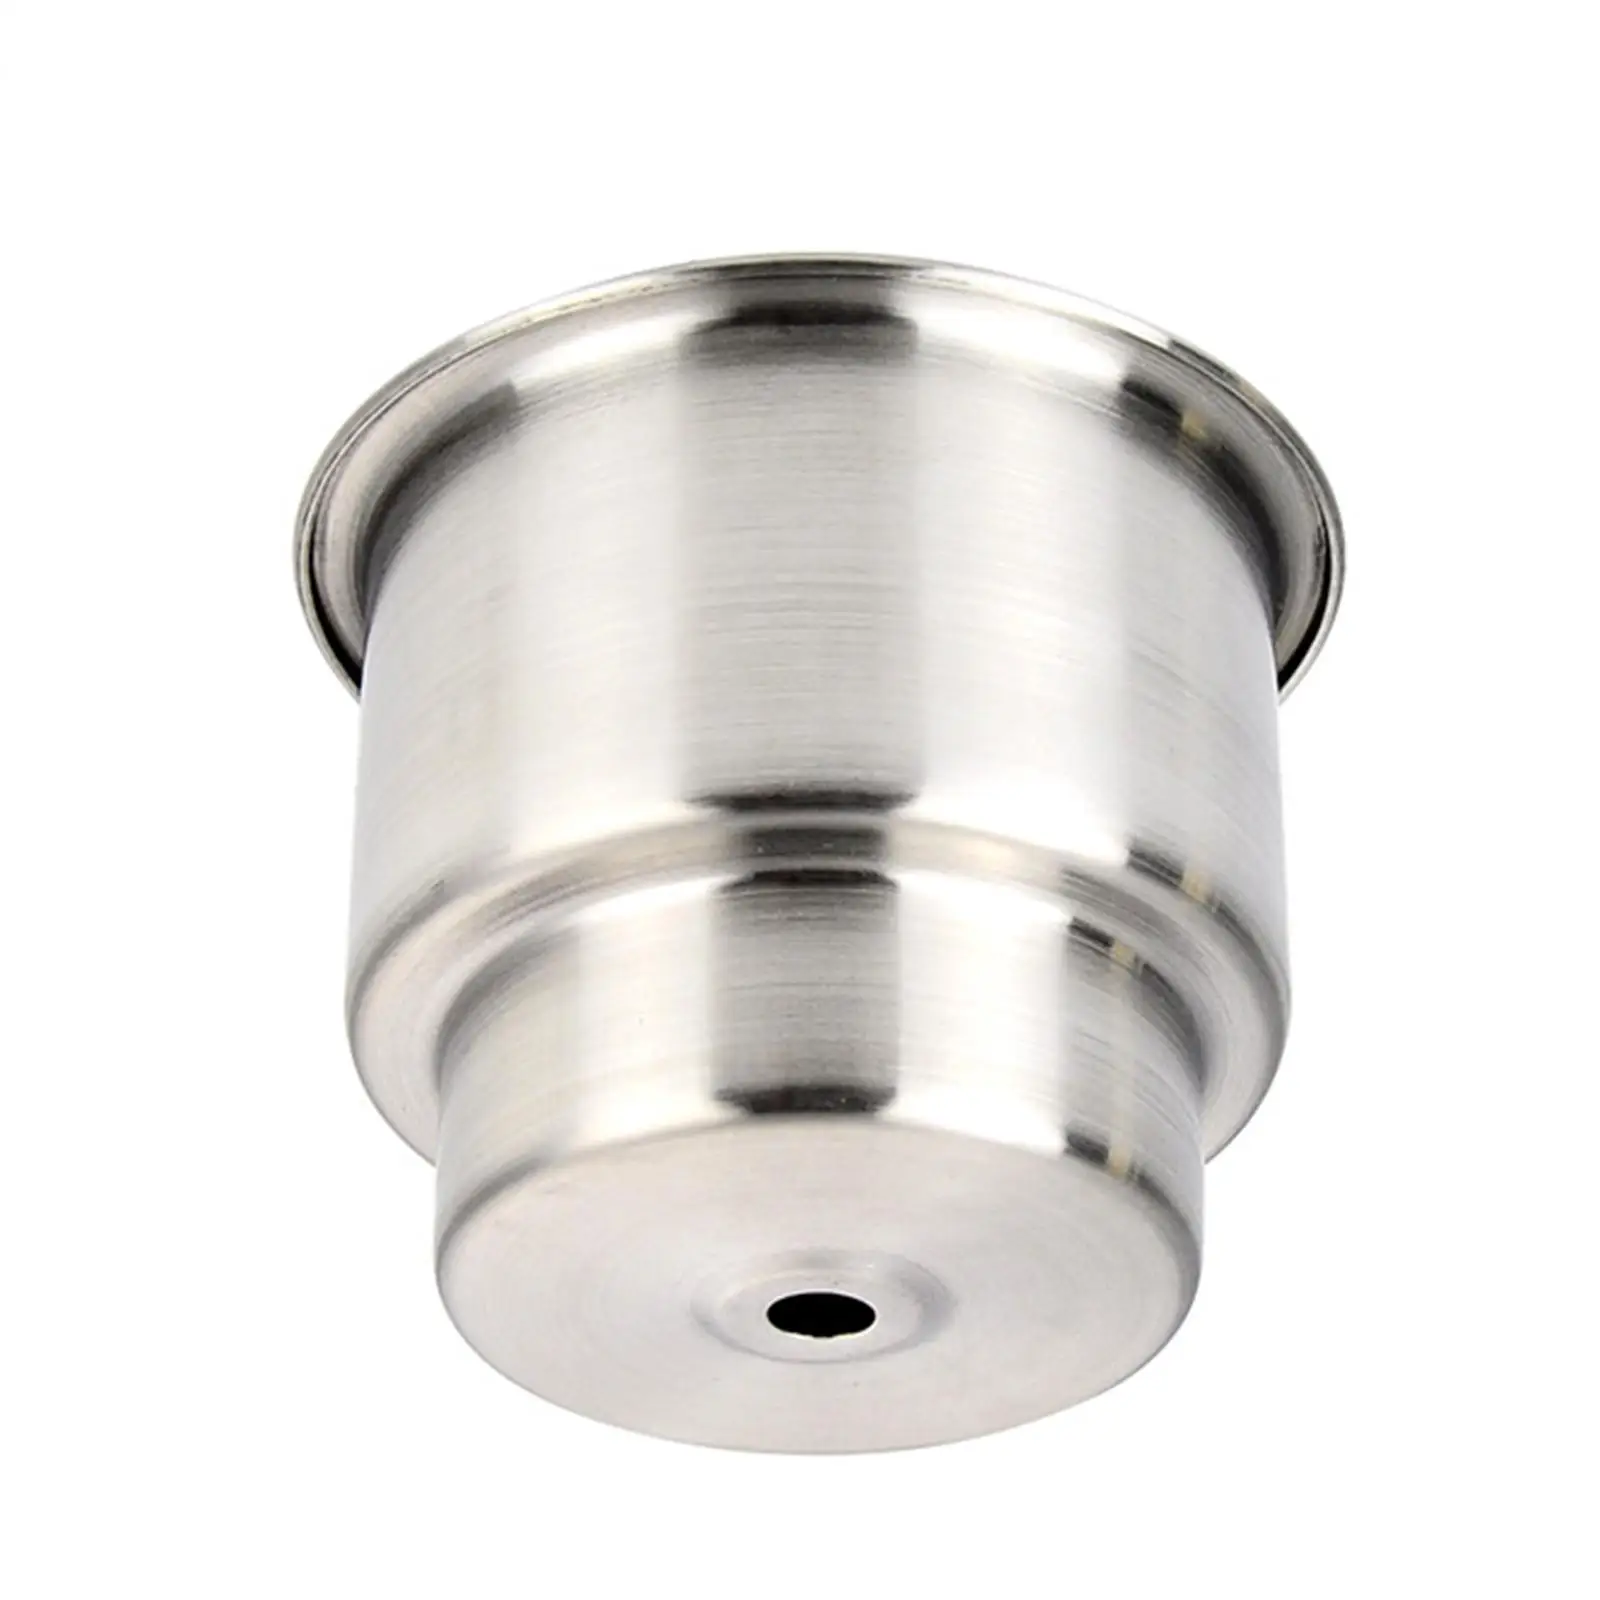 Cup Drink Holder Stainless Steel Recessed Drink Water Bottle Holder for Car Truck Boat RV Silver Color Car Accessories